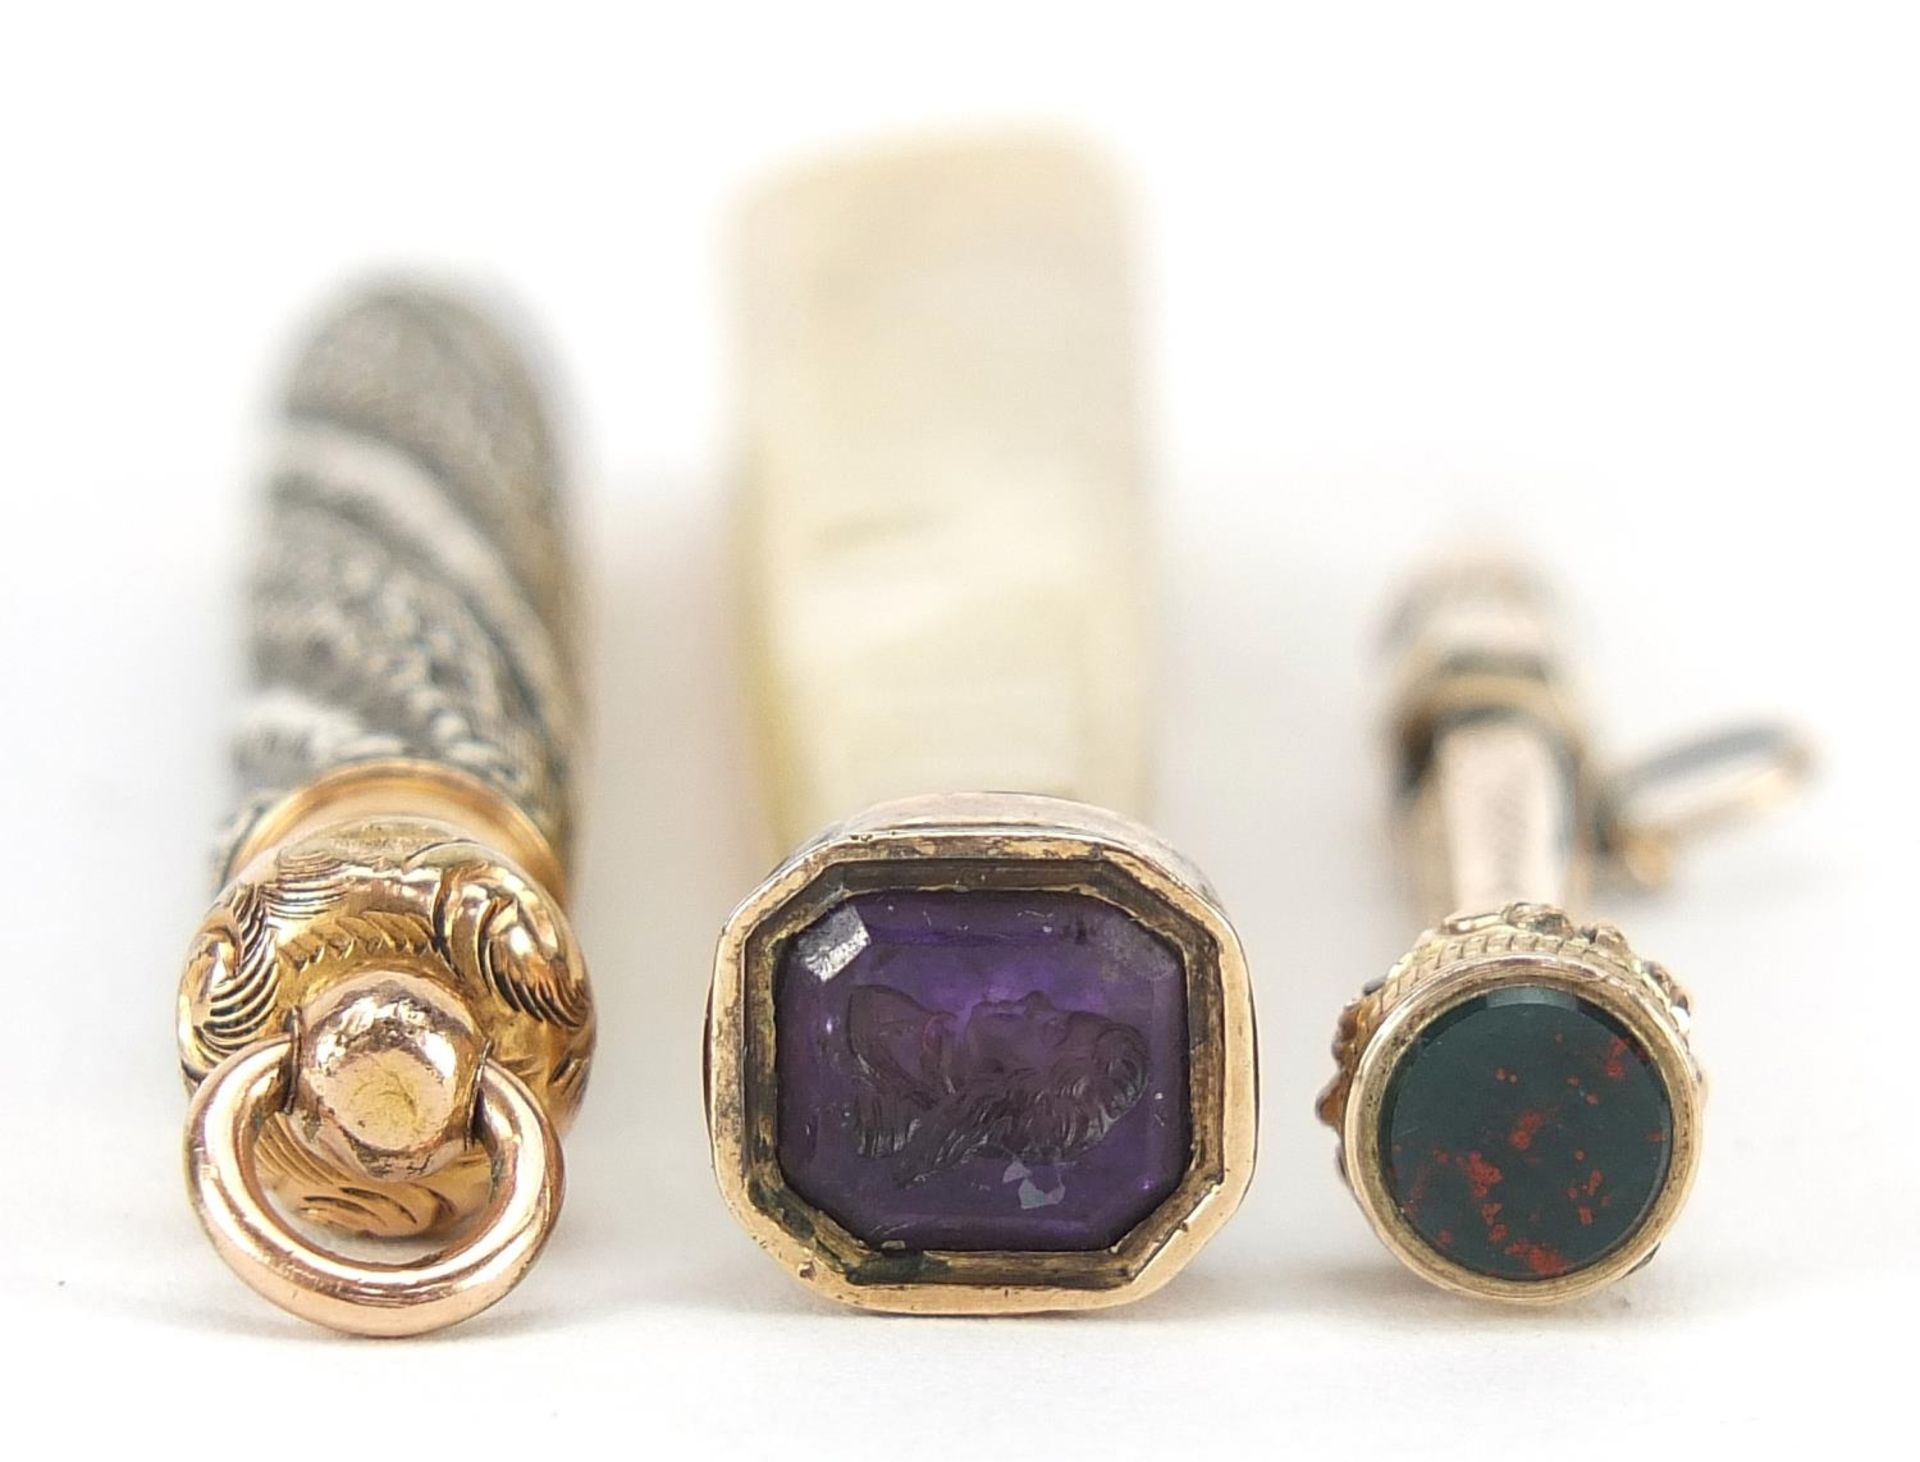 Antique objects comprising mother of pearl and amethyst intaglio seal, unmarked gold propelling - Image 5 of 6